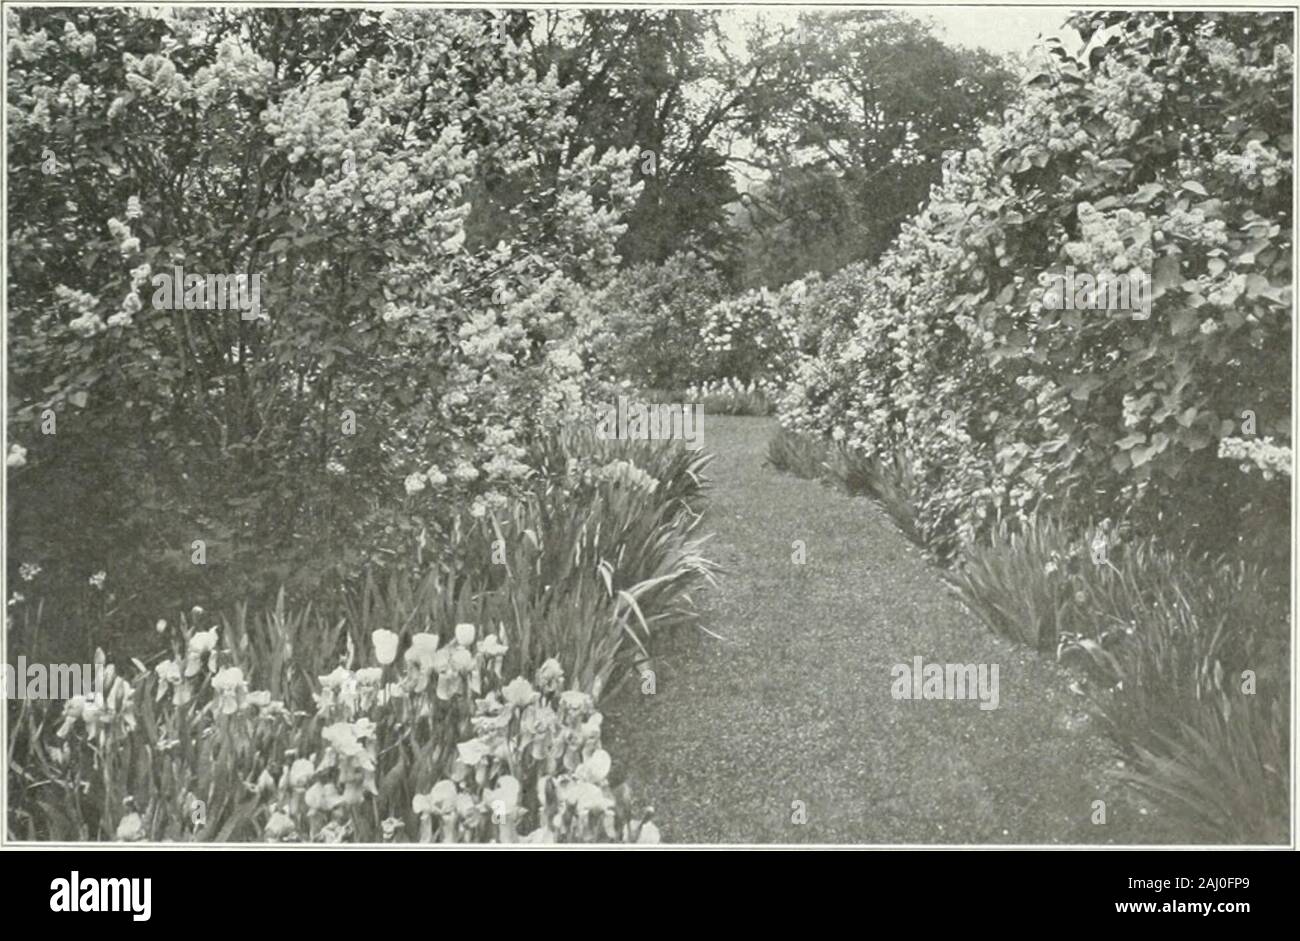 Beautiful gardens in America . From a plwlo^raph by Vurt$ Bi PLATE 15 Wilk-sley, Mass. H. H. Hunnewell, Esq.. From a photograph by The J. llnniC .f&lt;Farland Co. Holm Lea, Brookline, Mass. Professor C. S. Sargent PLATE 16 Stock Photo